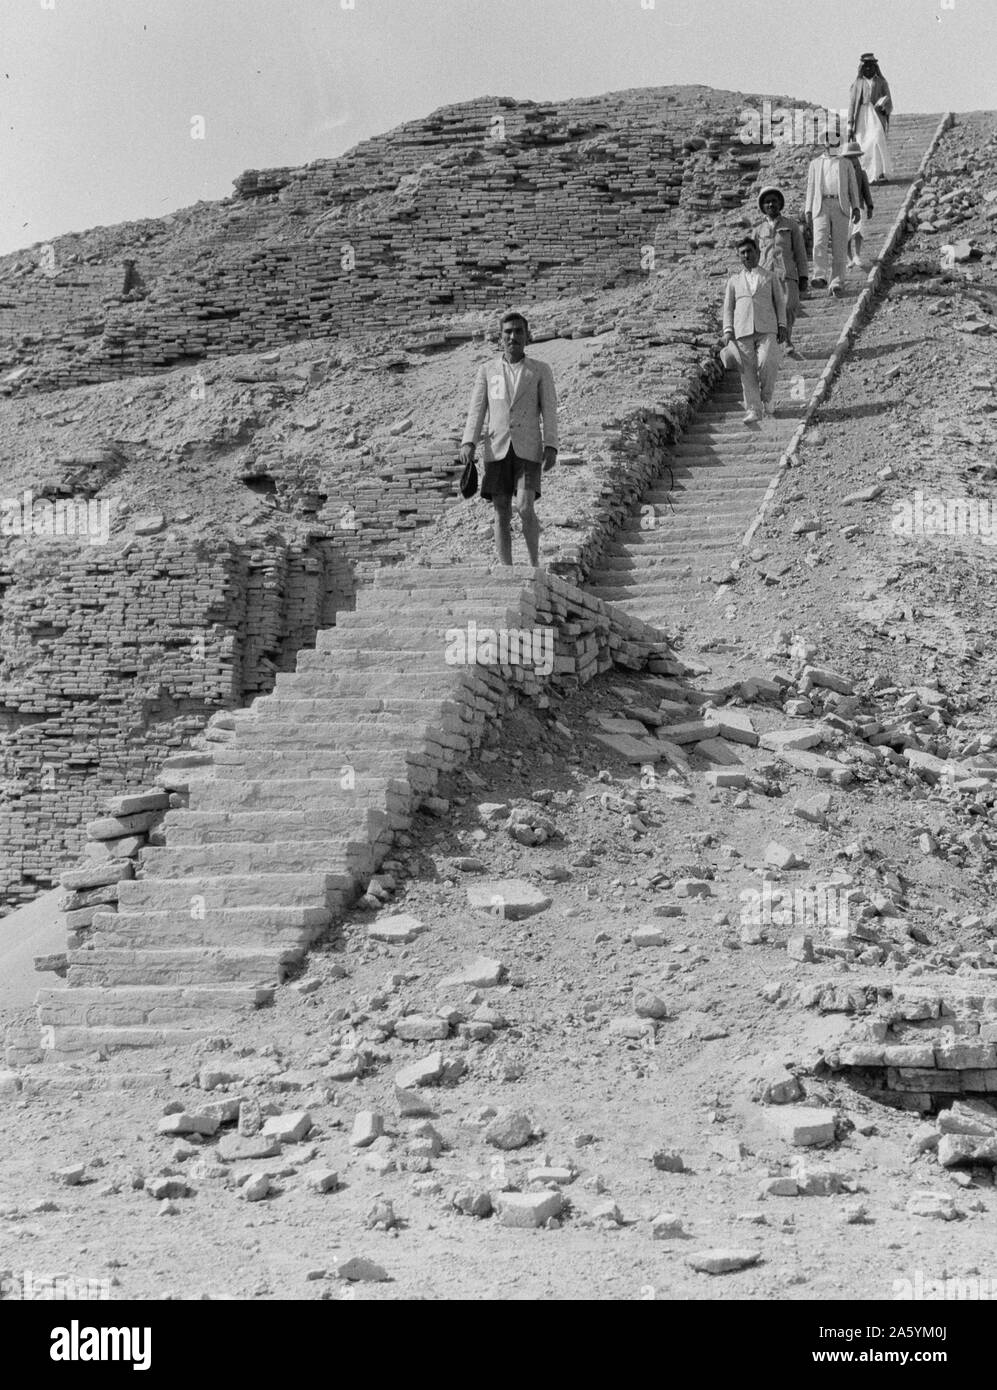 The reconstructed staircase of the Neo-Sumerian Great Ziggurat of Ur, near Nasiriya, Iraq. Ziggurats were built by the Sumerians, Babylonians, Elamites, Acadians, and Assyrians for local religions. Each ziggurat was part of a temple complex which included other buildings. The precursors of the ziggurat were raised platforms that date from the Ubaid period, during the fourth millennium BC. Stock Photo